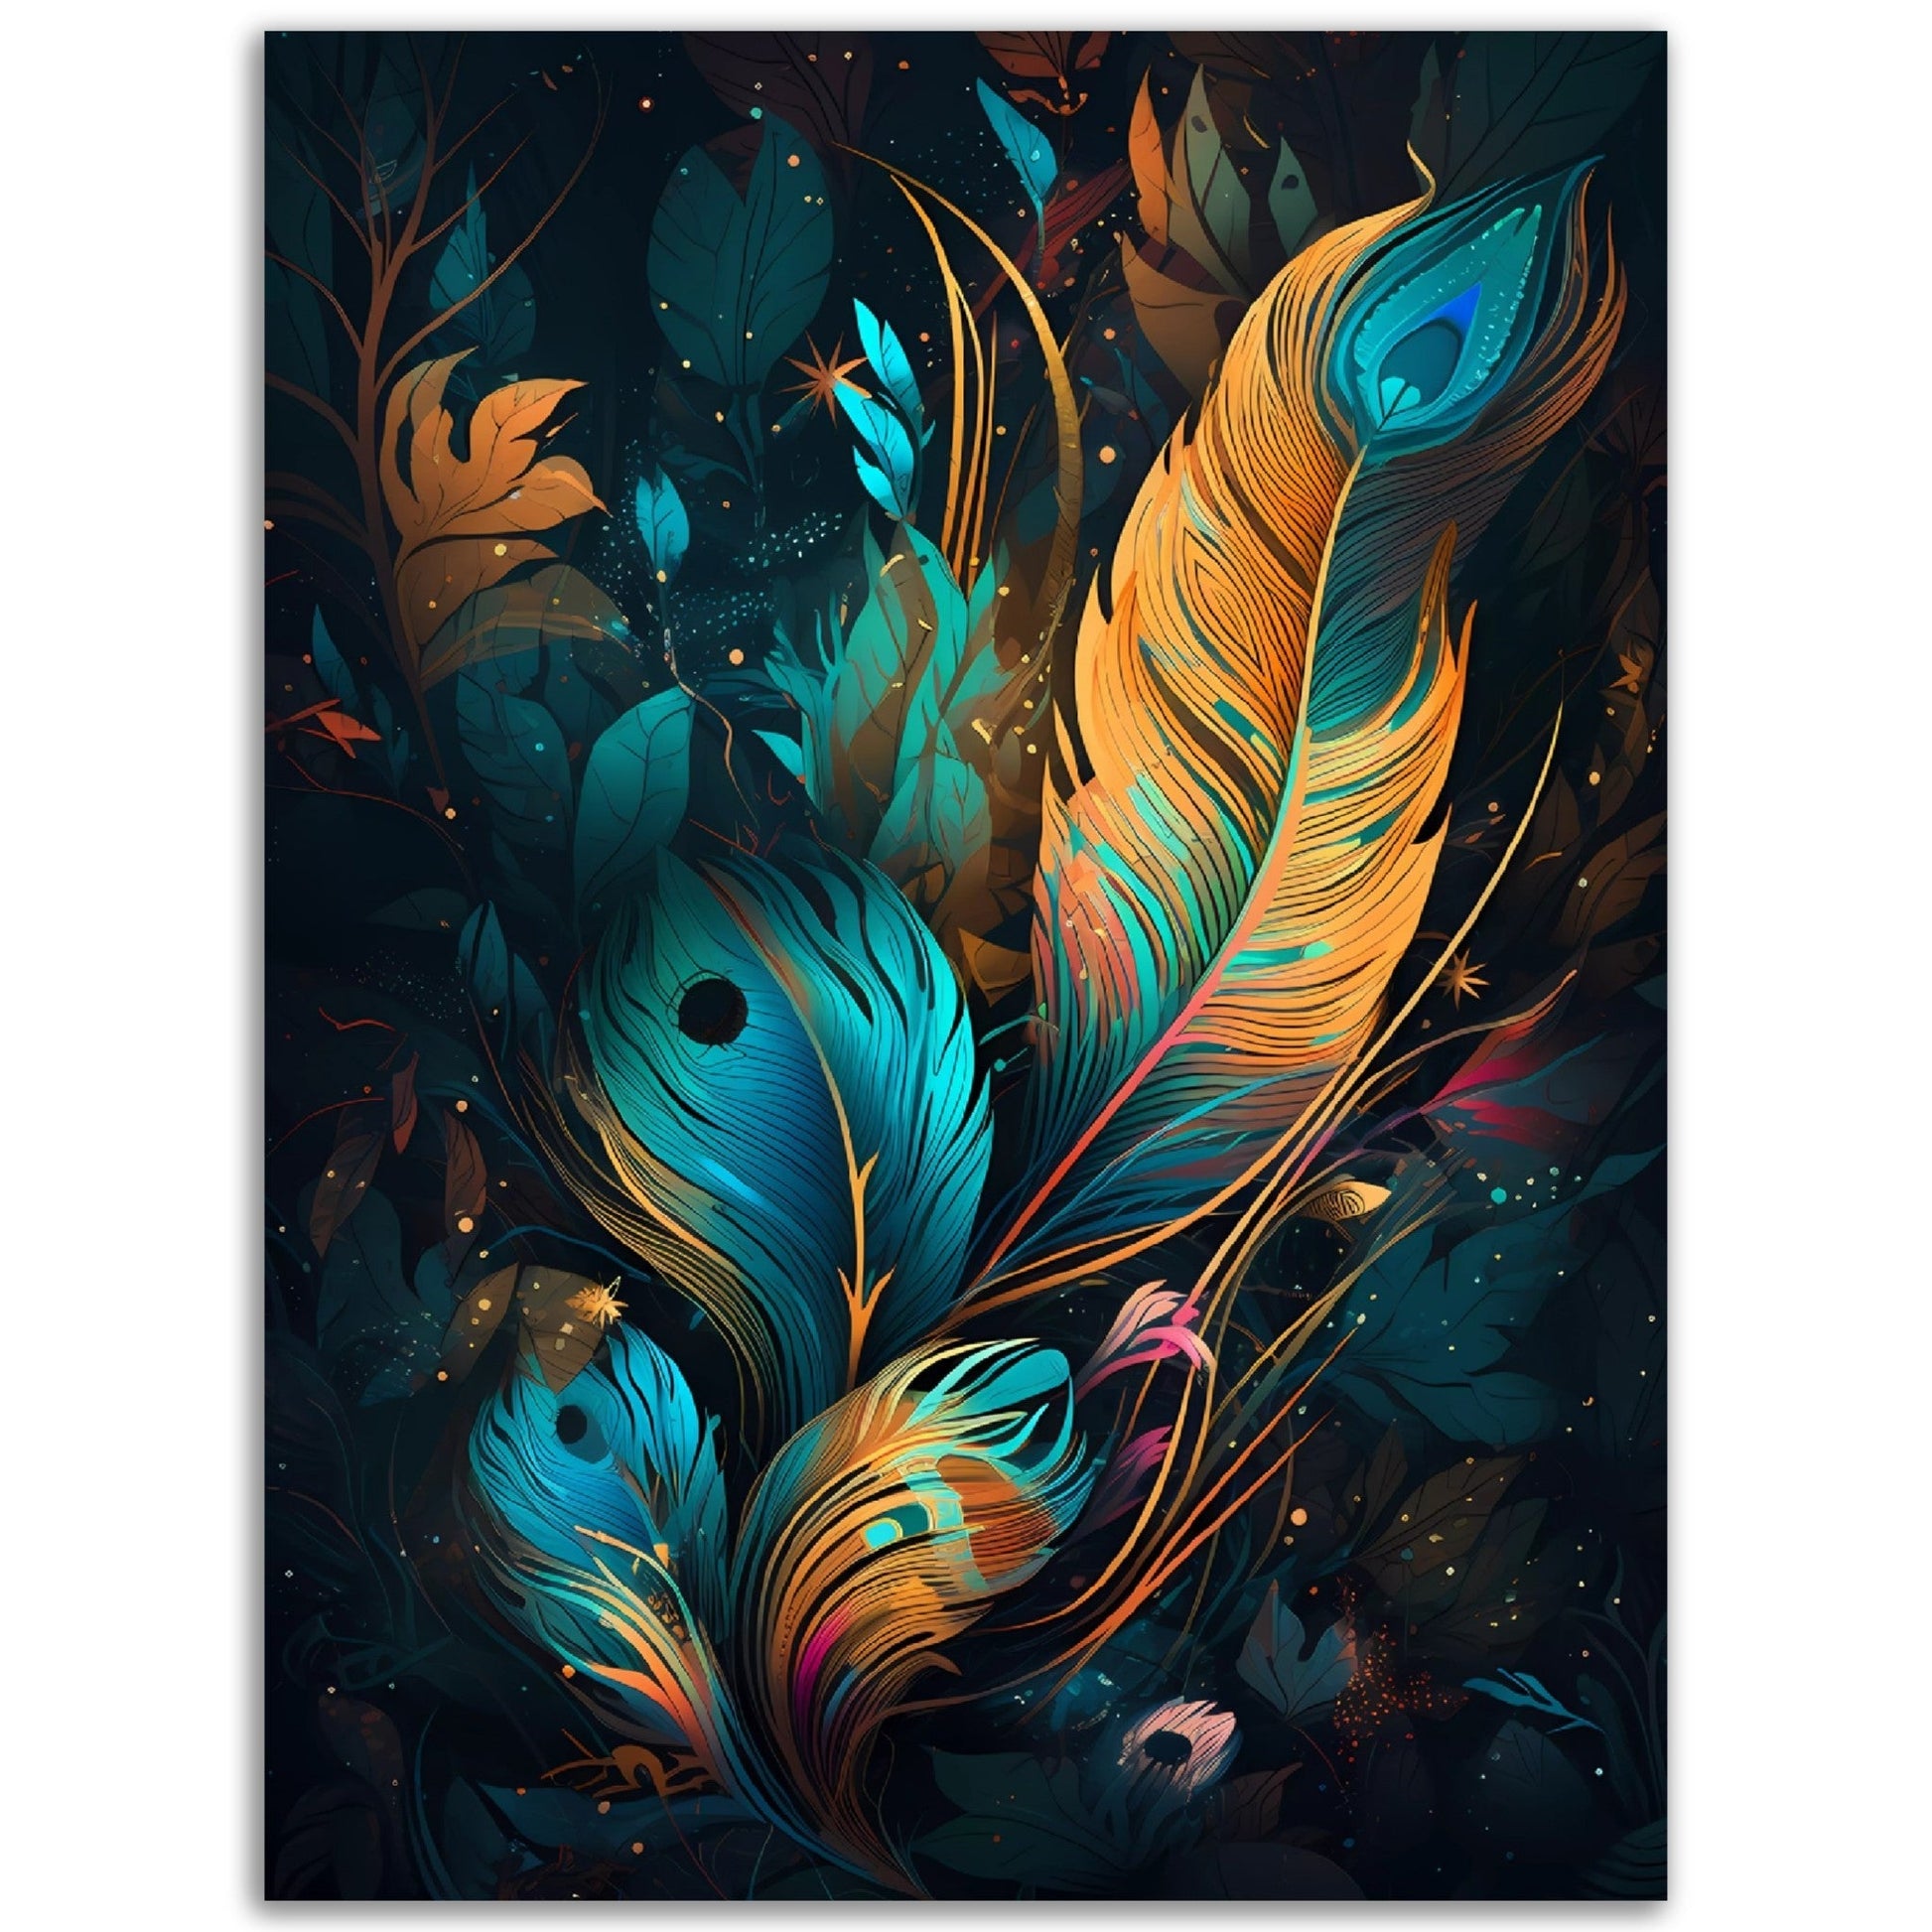 Elegant Abstraction on a black background create stunning Poster Wall Art.